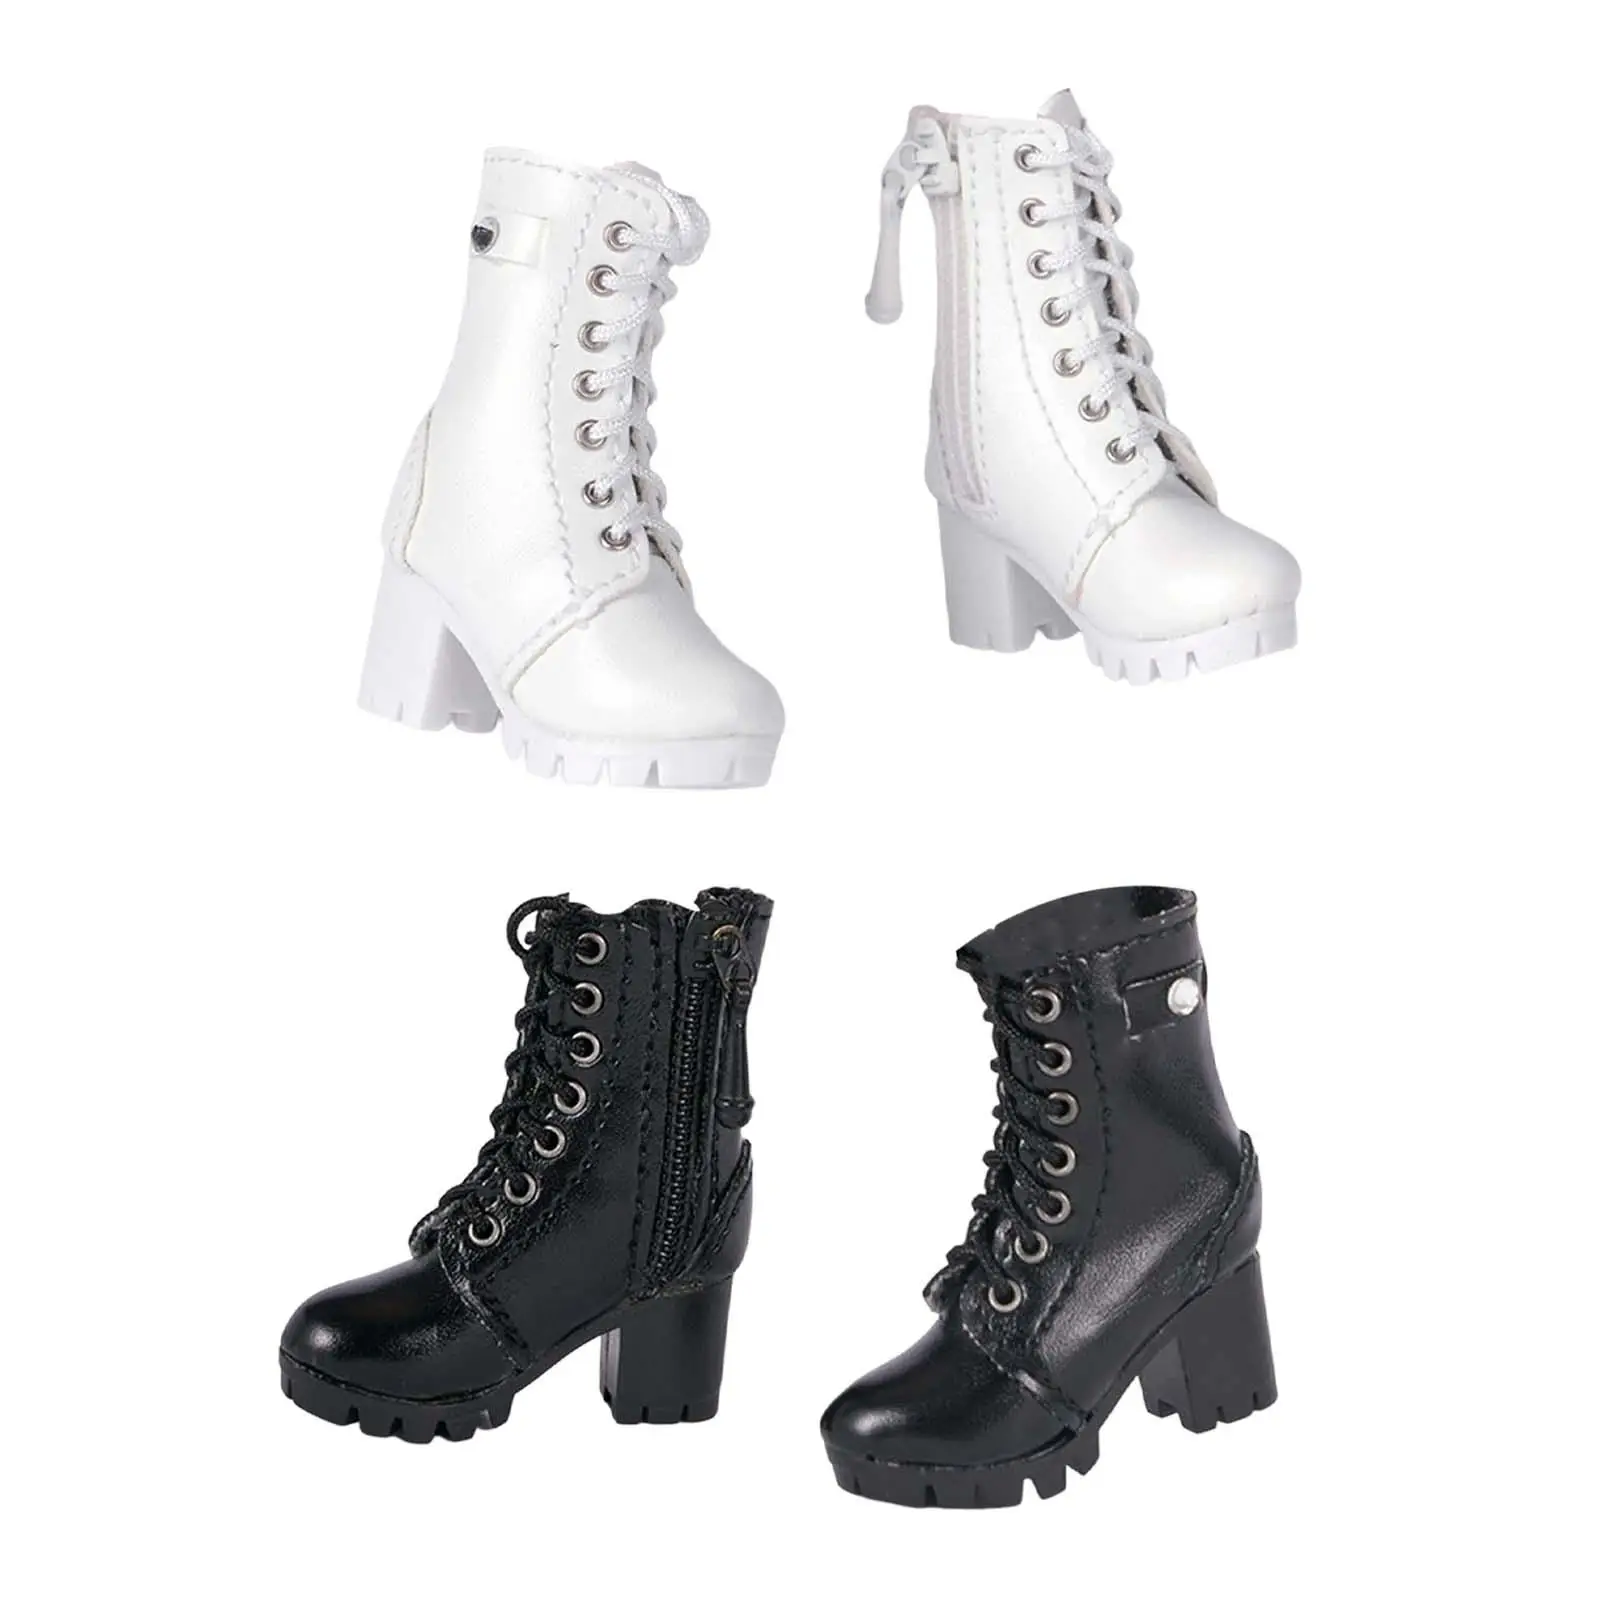 1:6 Scale High Heeled Shoes Boot for 12inch Women Figures Doll Model Dress up Accessories